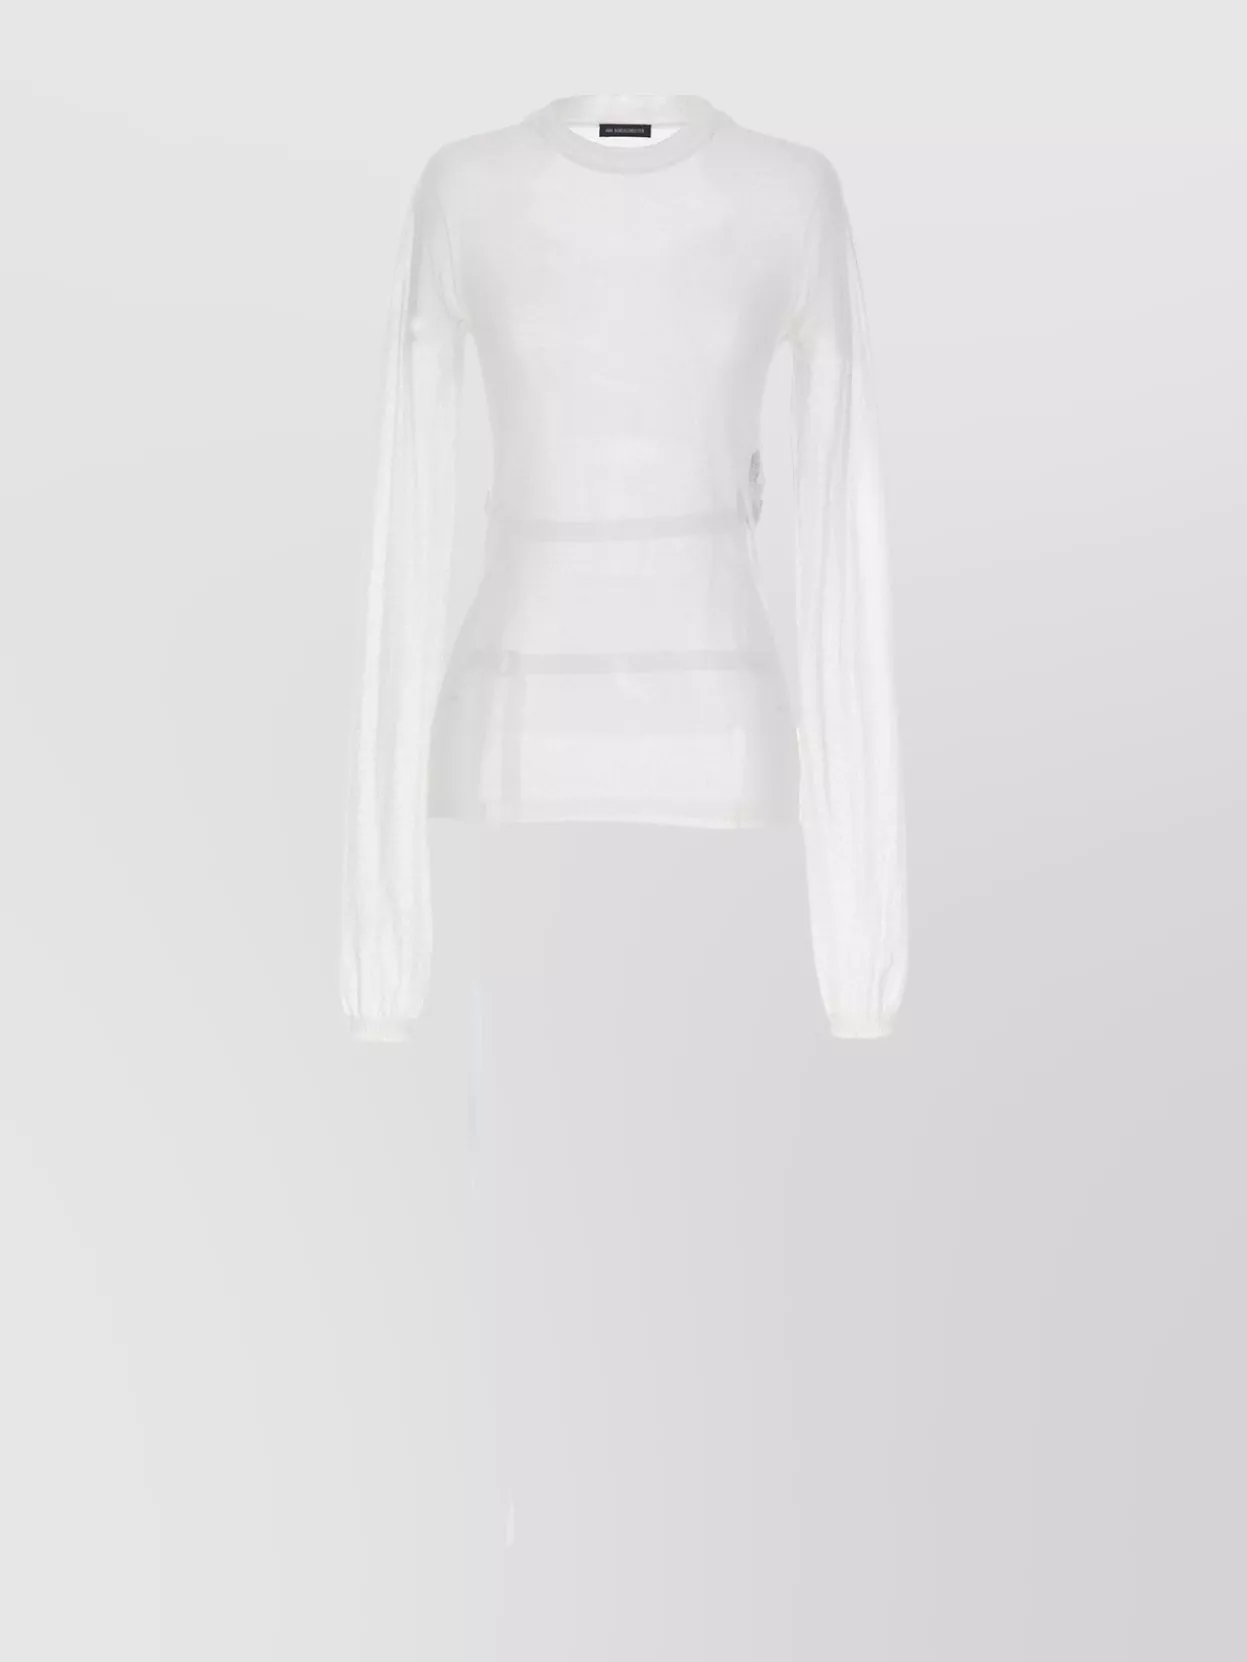 Ann Demeulemeester 'waist Belted Crew Neck Knit Sweater' In White